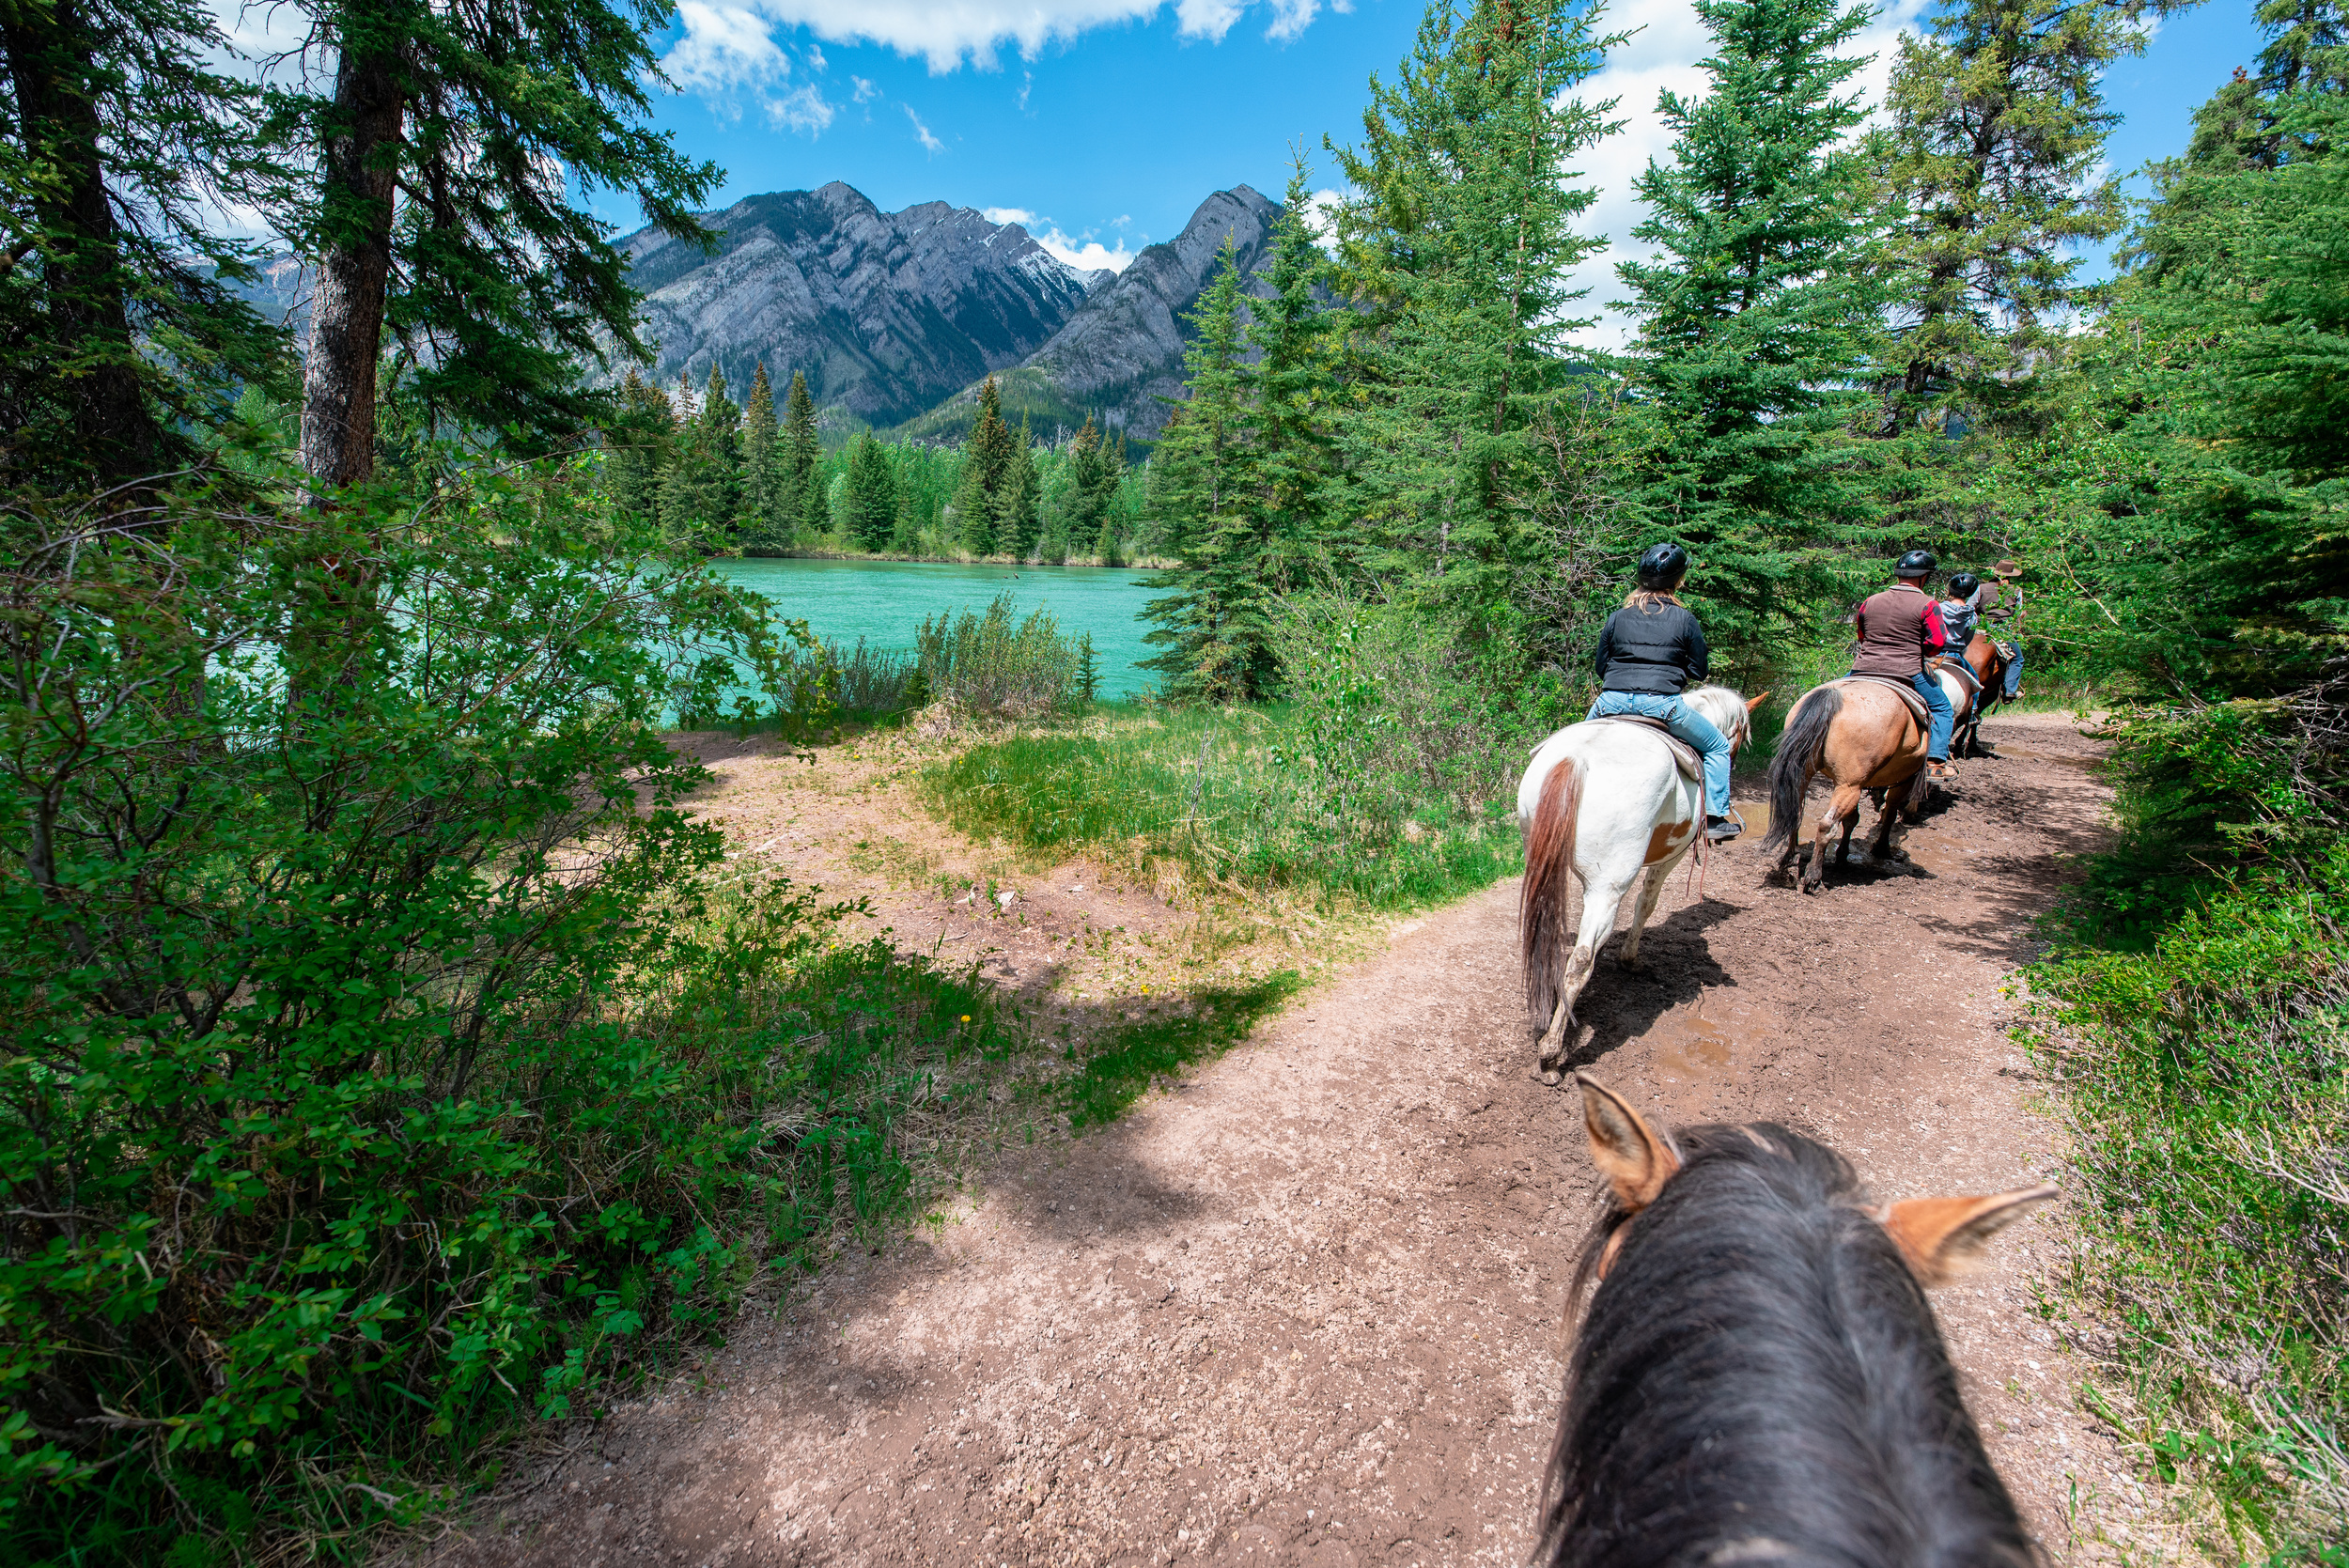 <p>Most people hike or ski in Canada’s world-class mountains. But if you’re up for something a bit different, numerous Alberta and British Columbia ranches offer amazing vacation packages. You can take a quick trail ride, overnight camp, or even have the full farm experience and stay a week on site!</p><p>You may also like: <a href='https://www.yardbarker.com/lifestyle/articles/18_things_you_think_are_normal_but_are_actually_uniquely_american_121923/s1__39111167'>18 things you think are normal but are actually uniquely American</a></p>